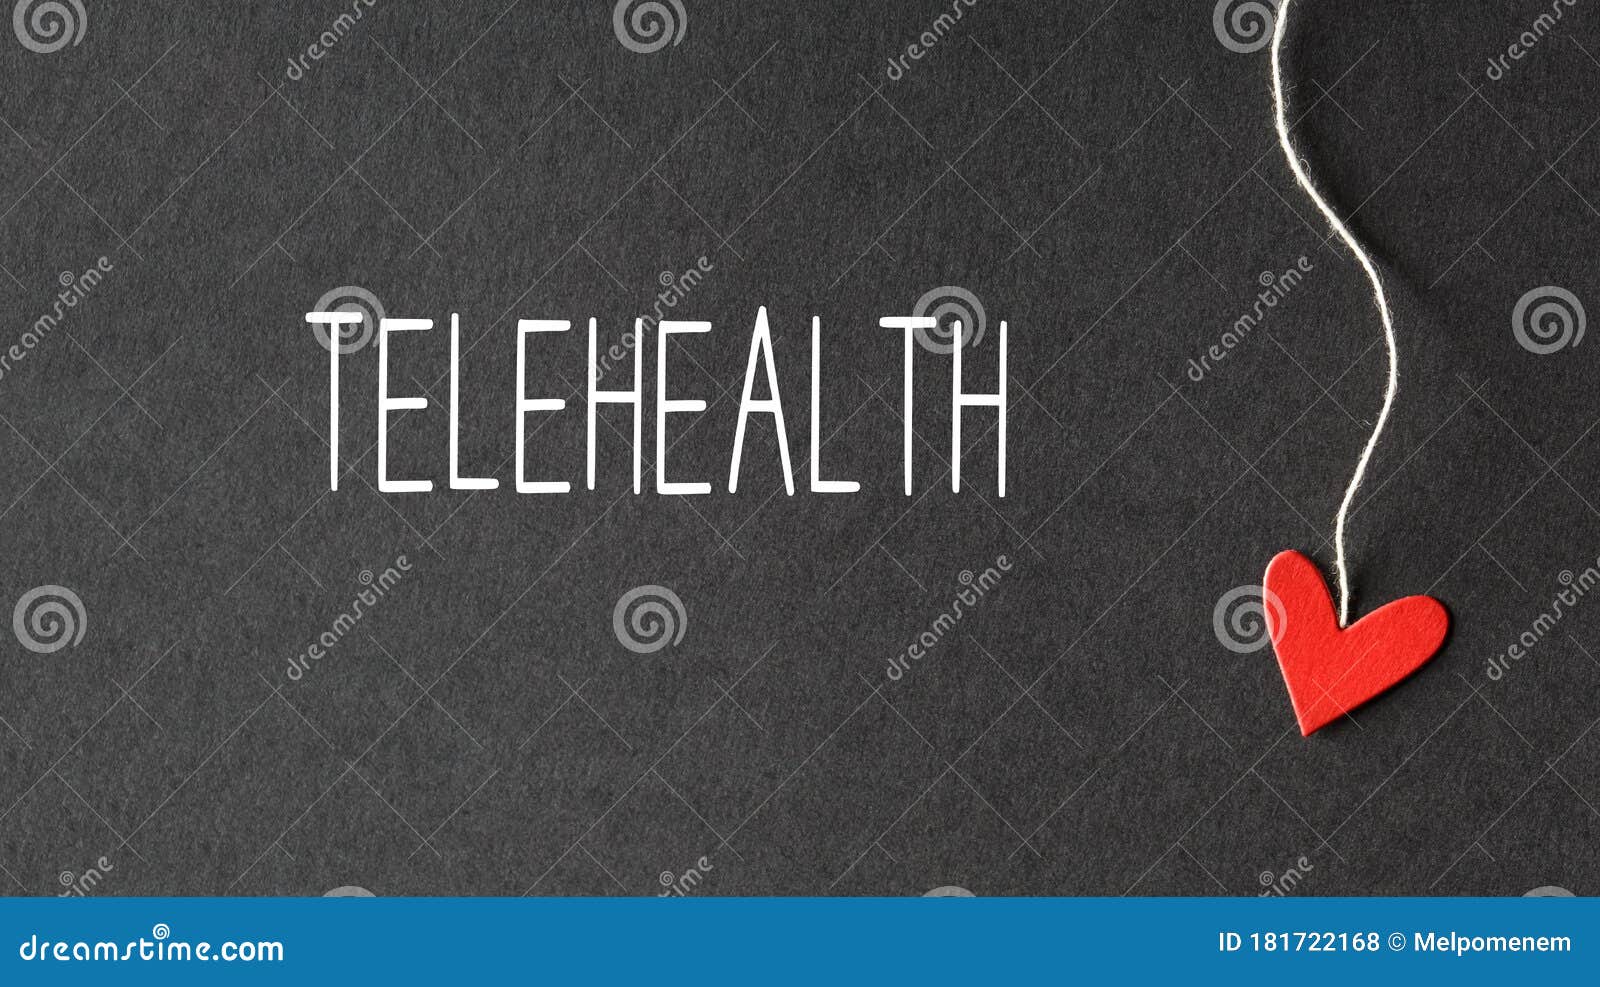 telehealth theme with paper hearts